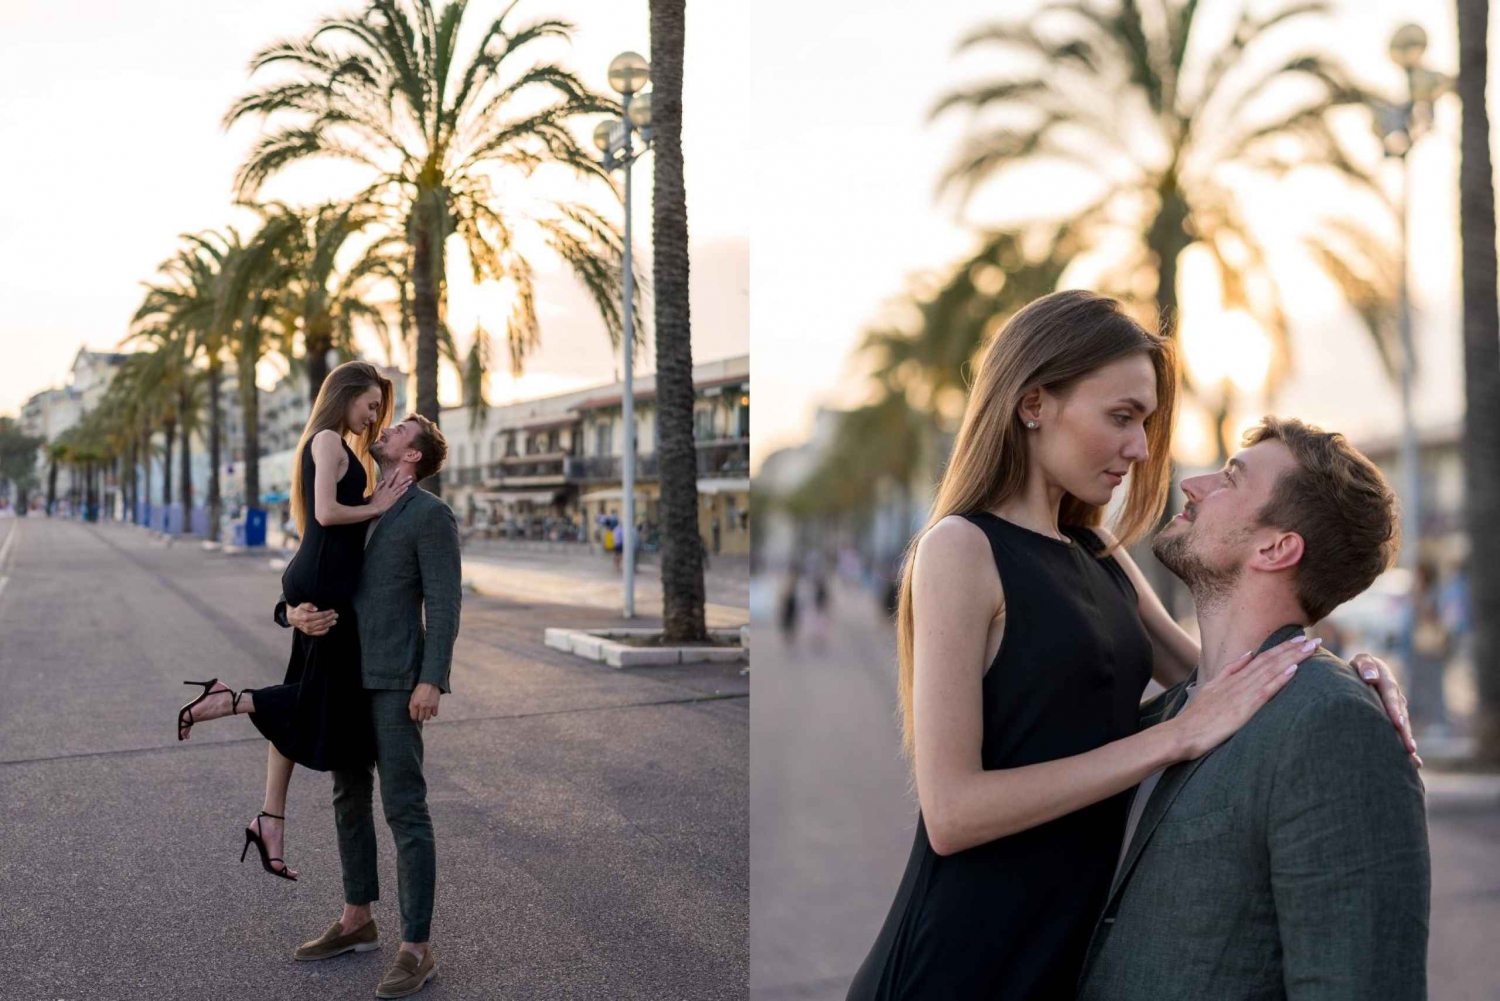 Photoshoot Adventure in Nice with a Pro Photographer